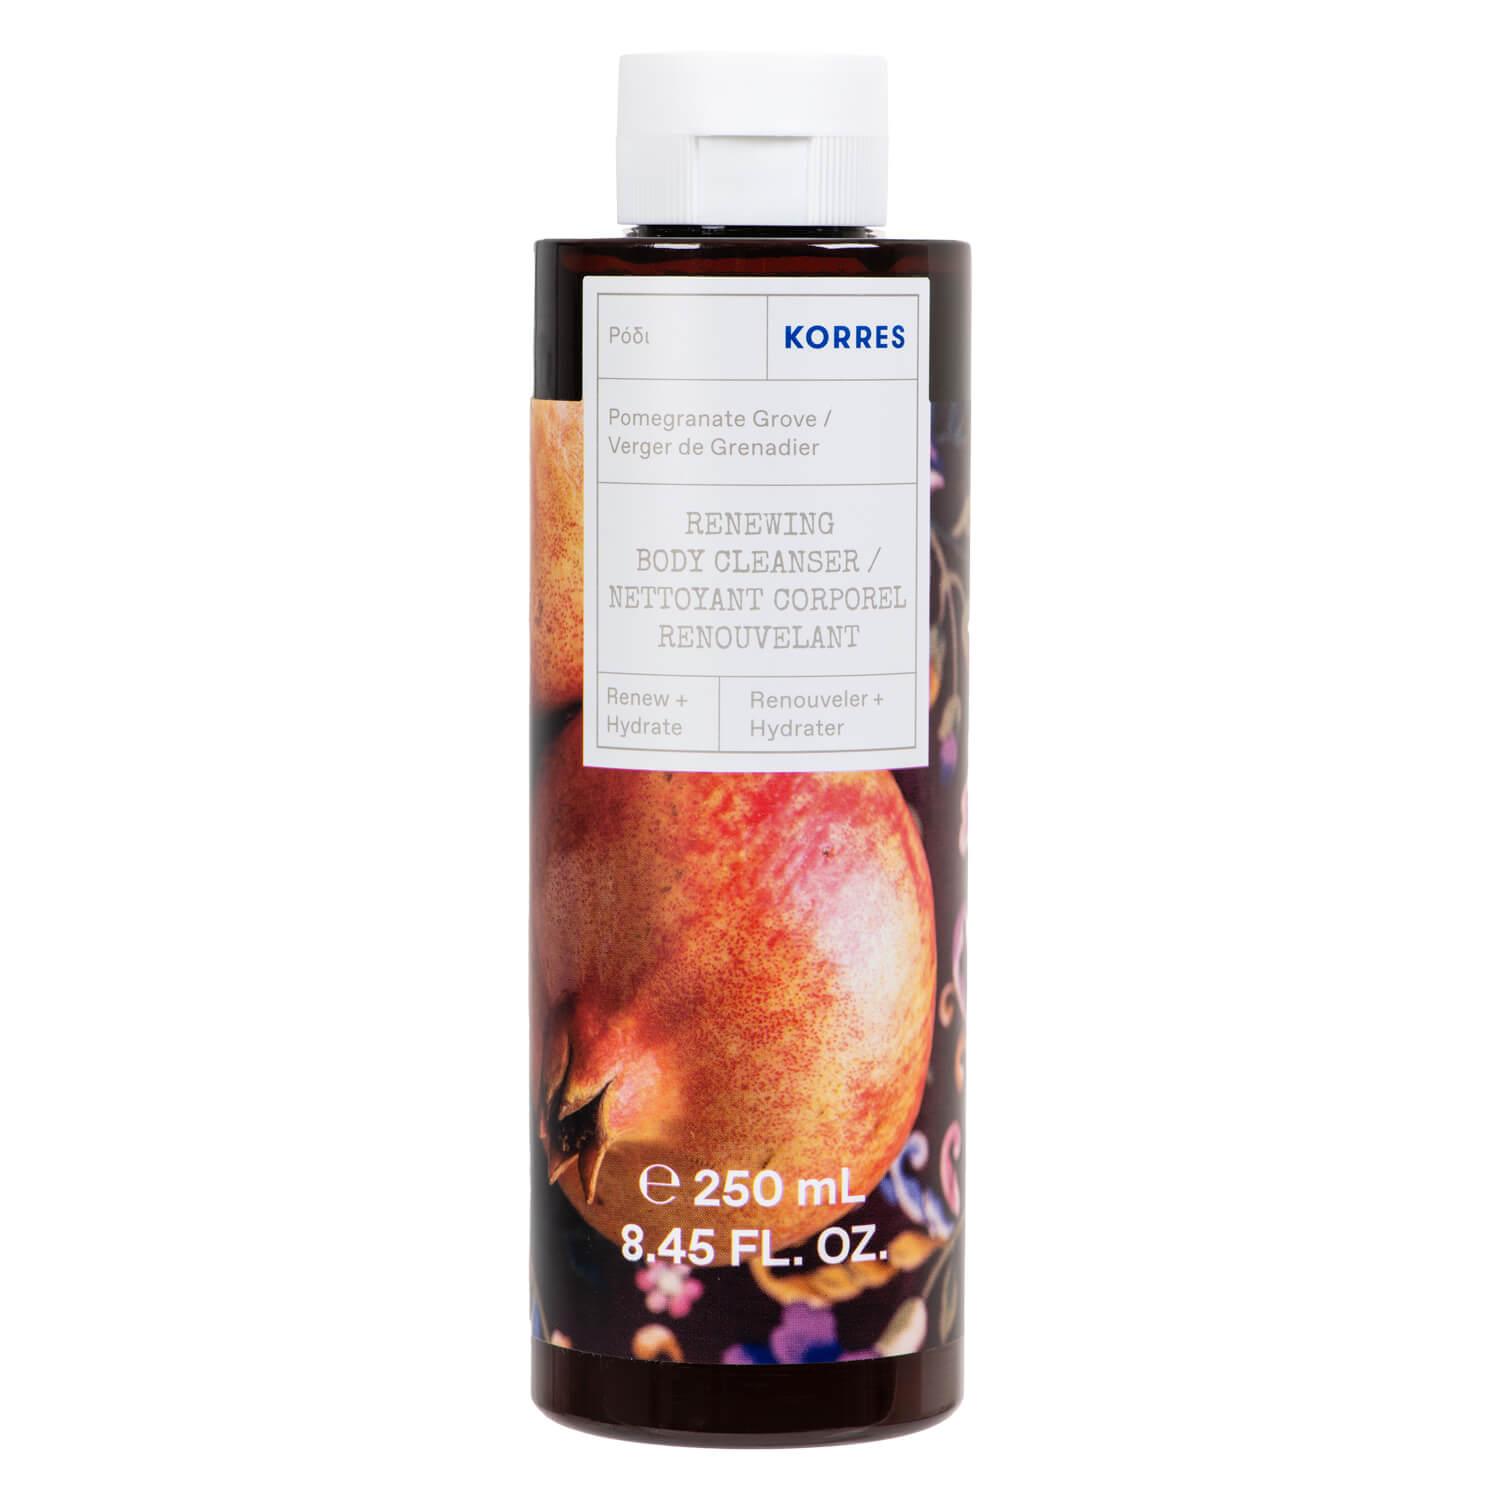 Korres Care - Pomegranate Grove Renewing Body Cleanser